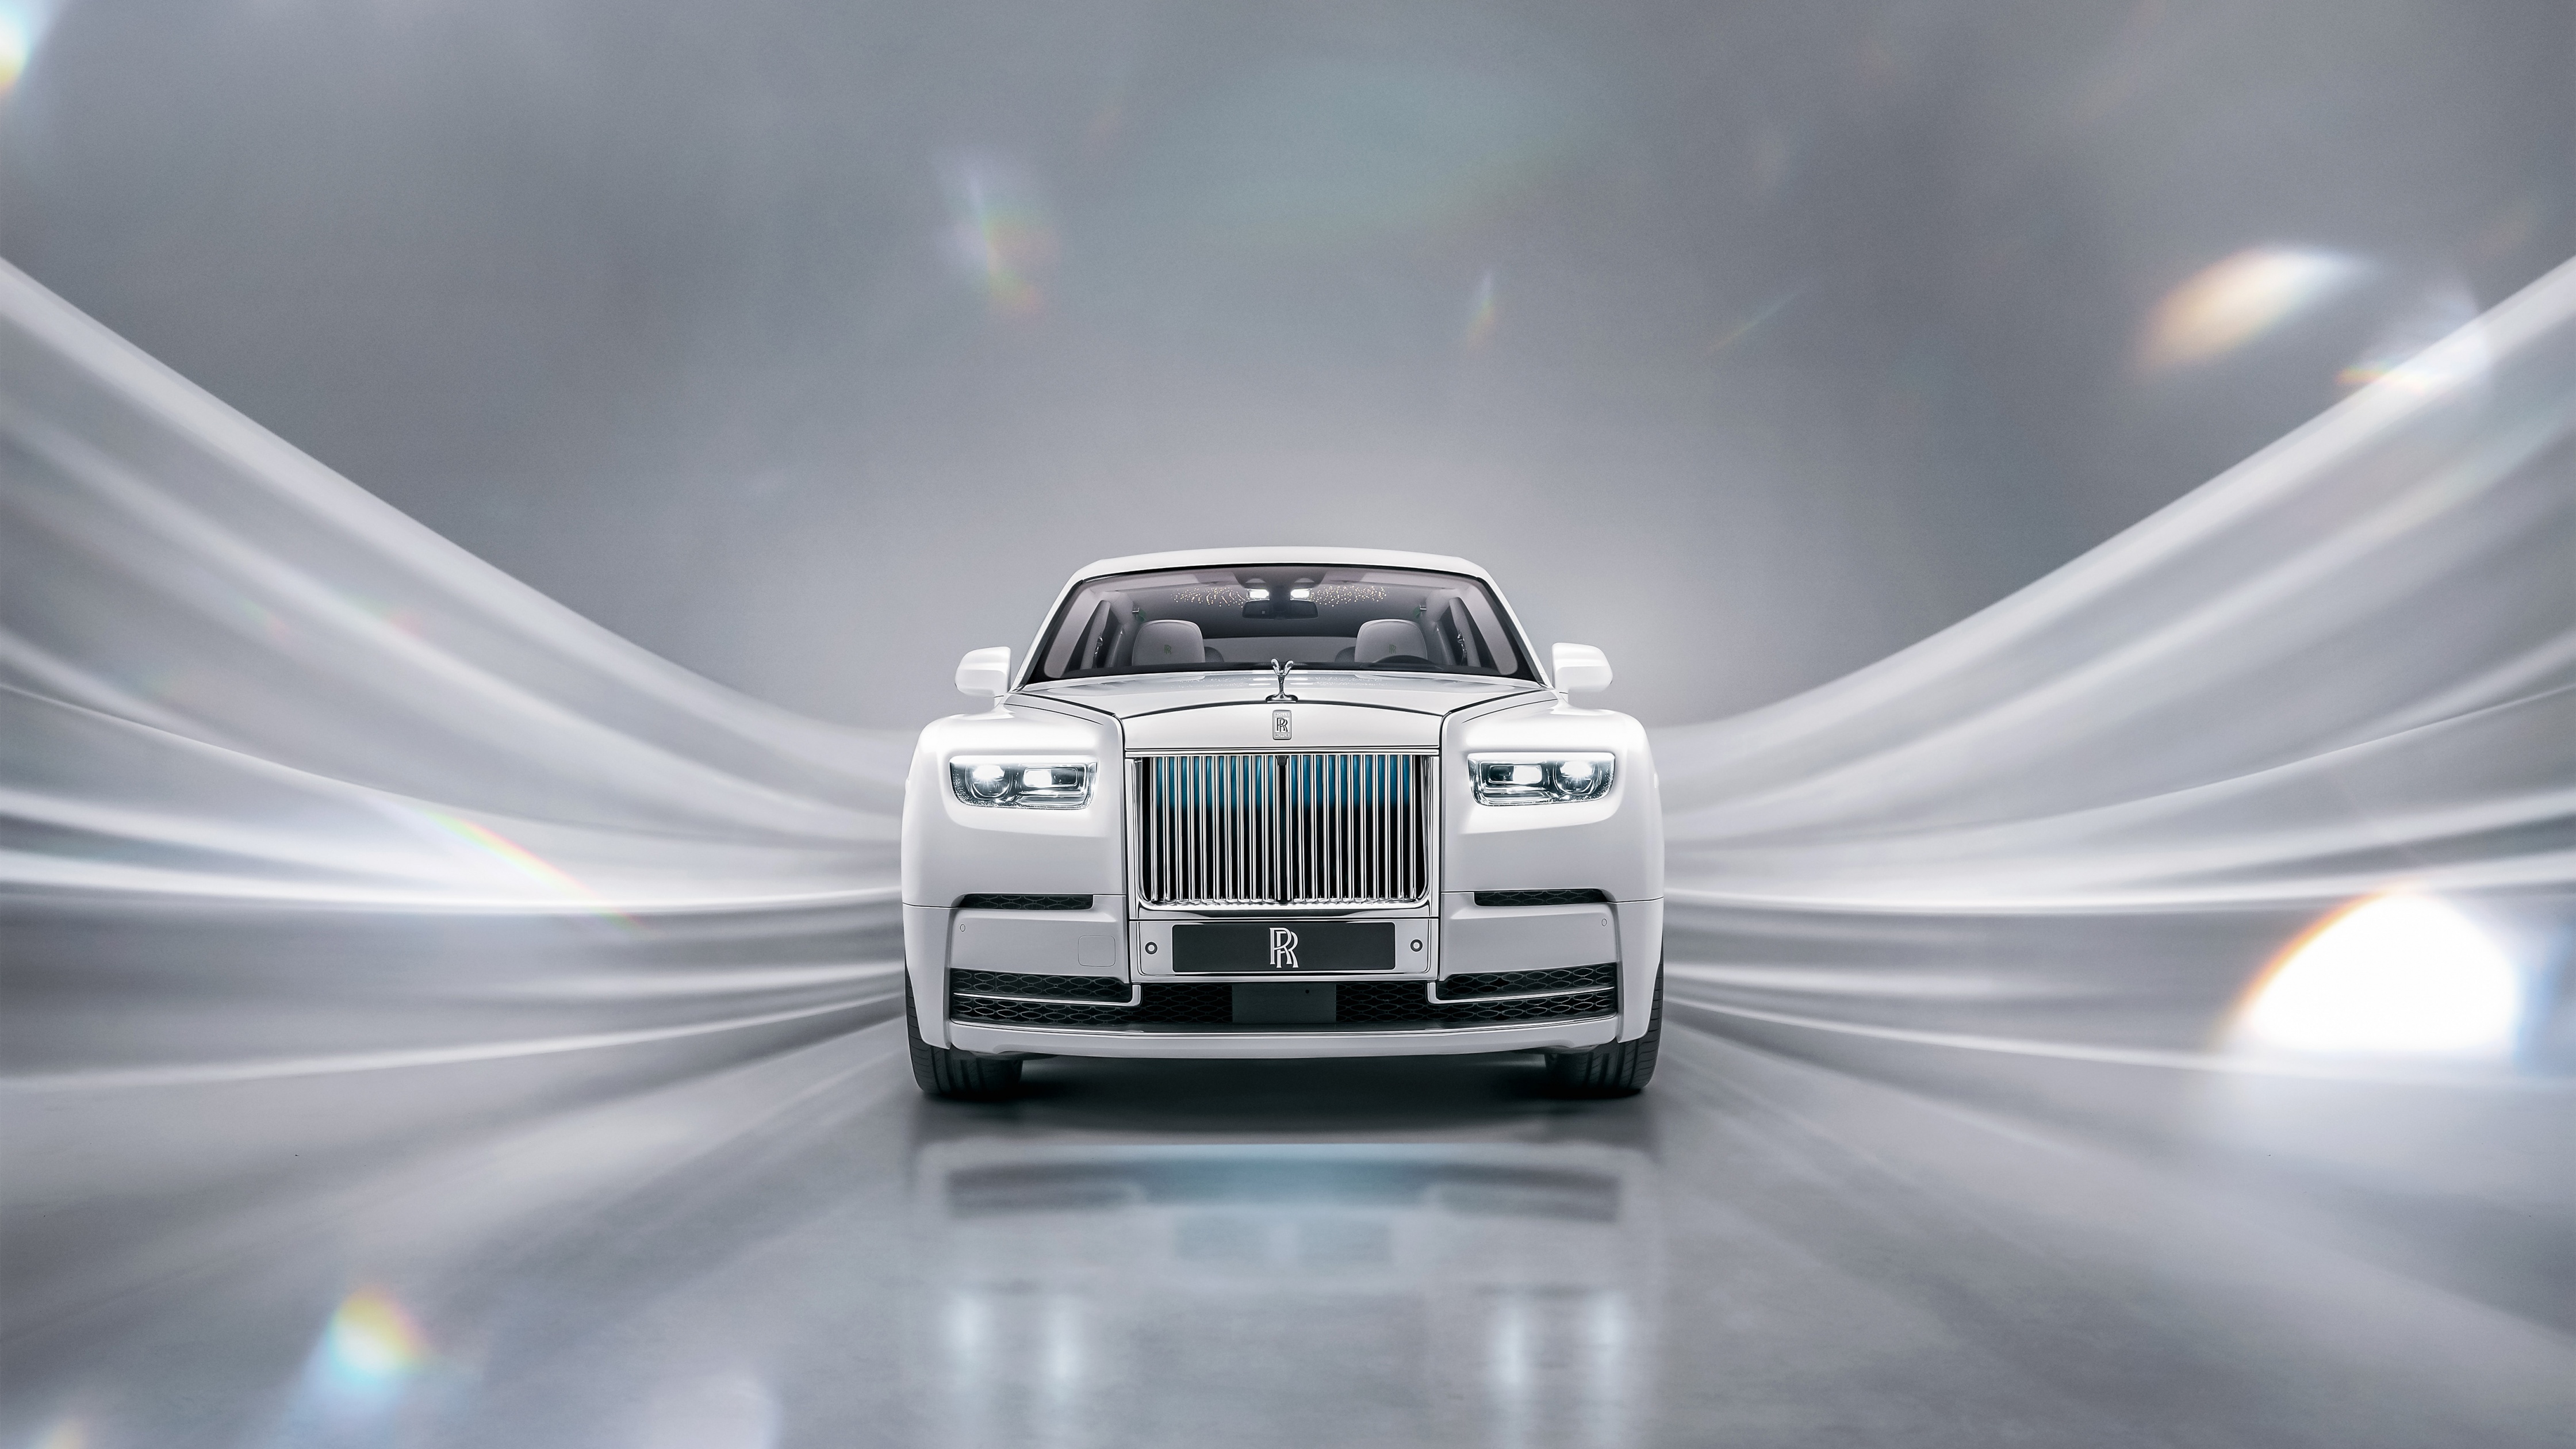 Spofec Rolls Royce Phantom 2019 8k HD Cars 4k Wallpapers Images  Backgrounds Photos and Pictures